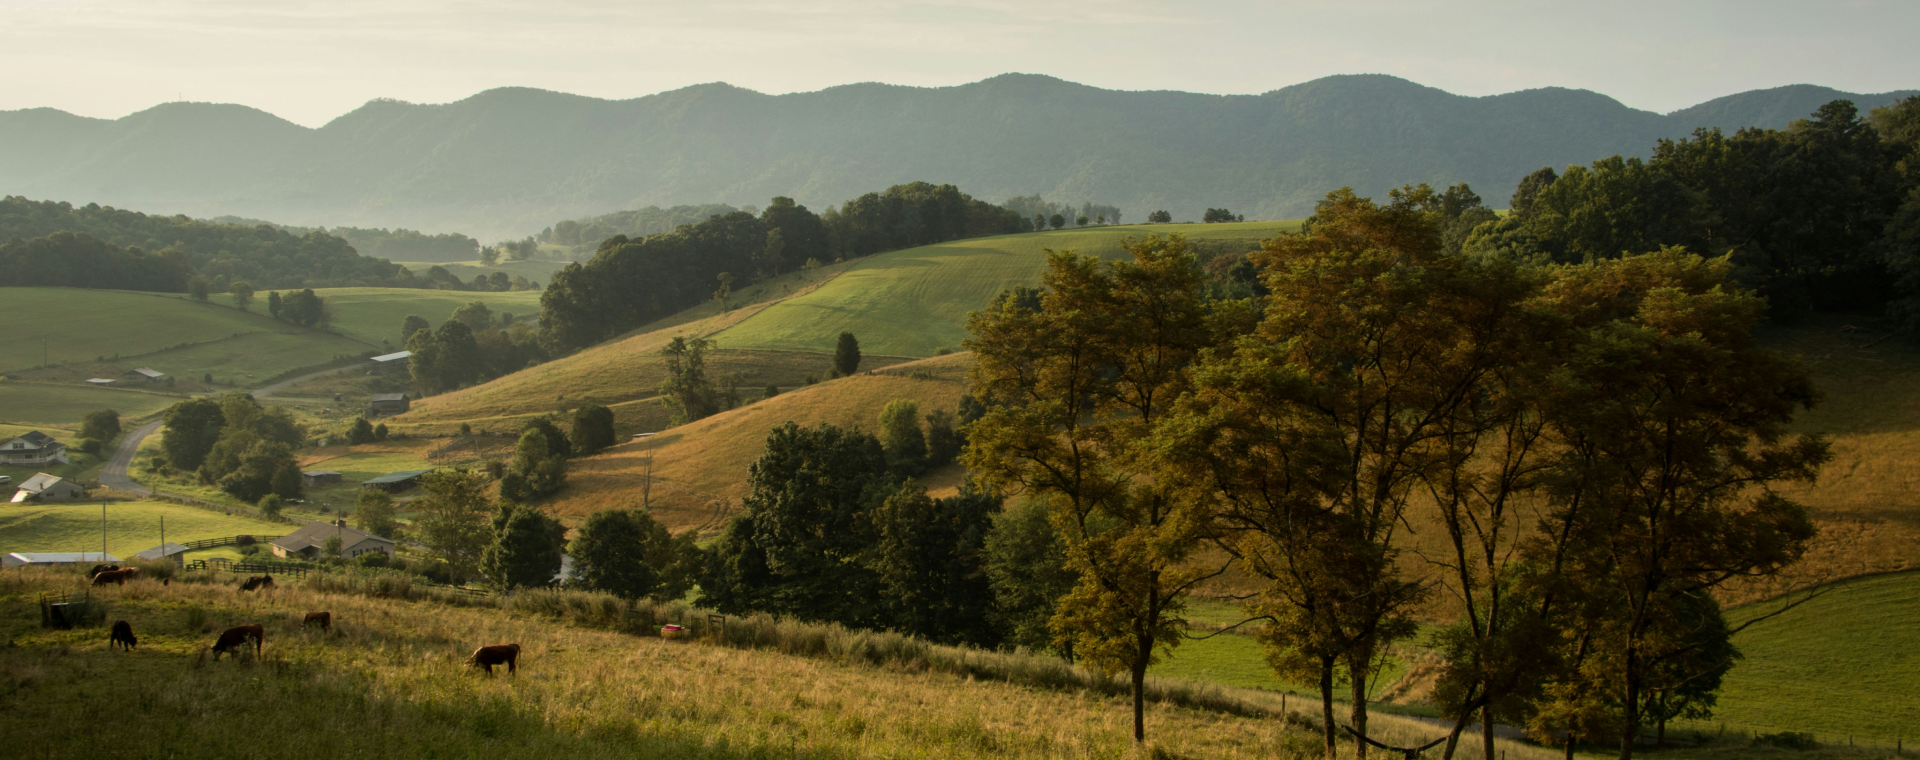 Rolling hills in Virginia countryside